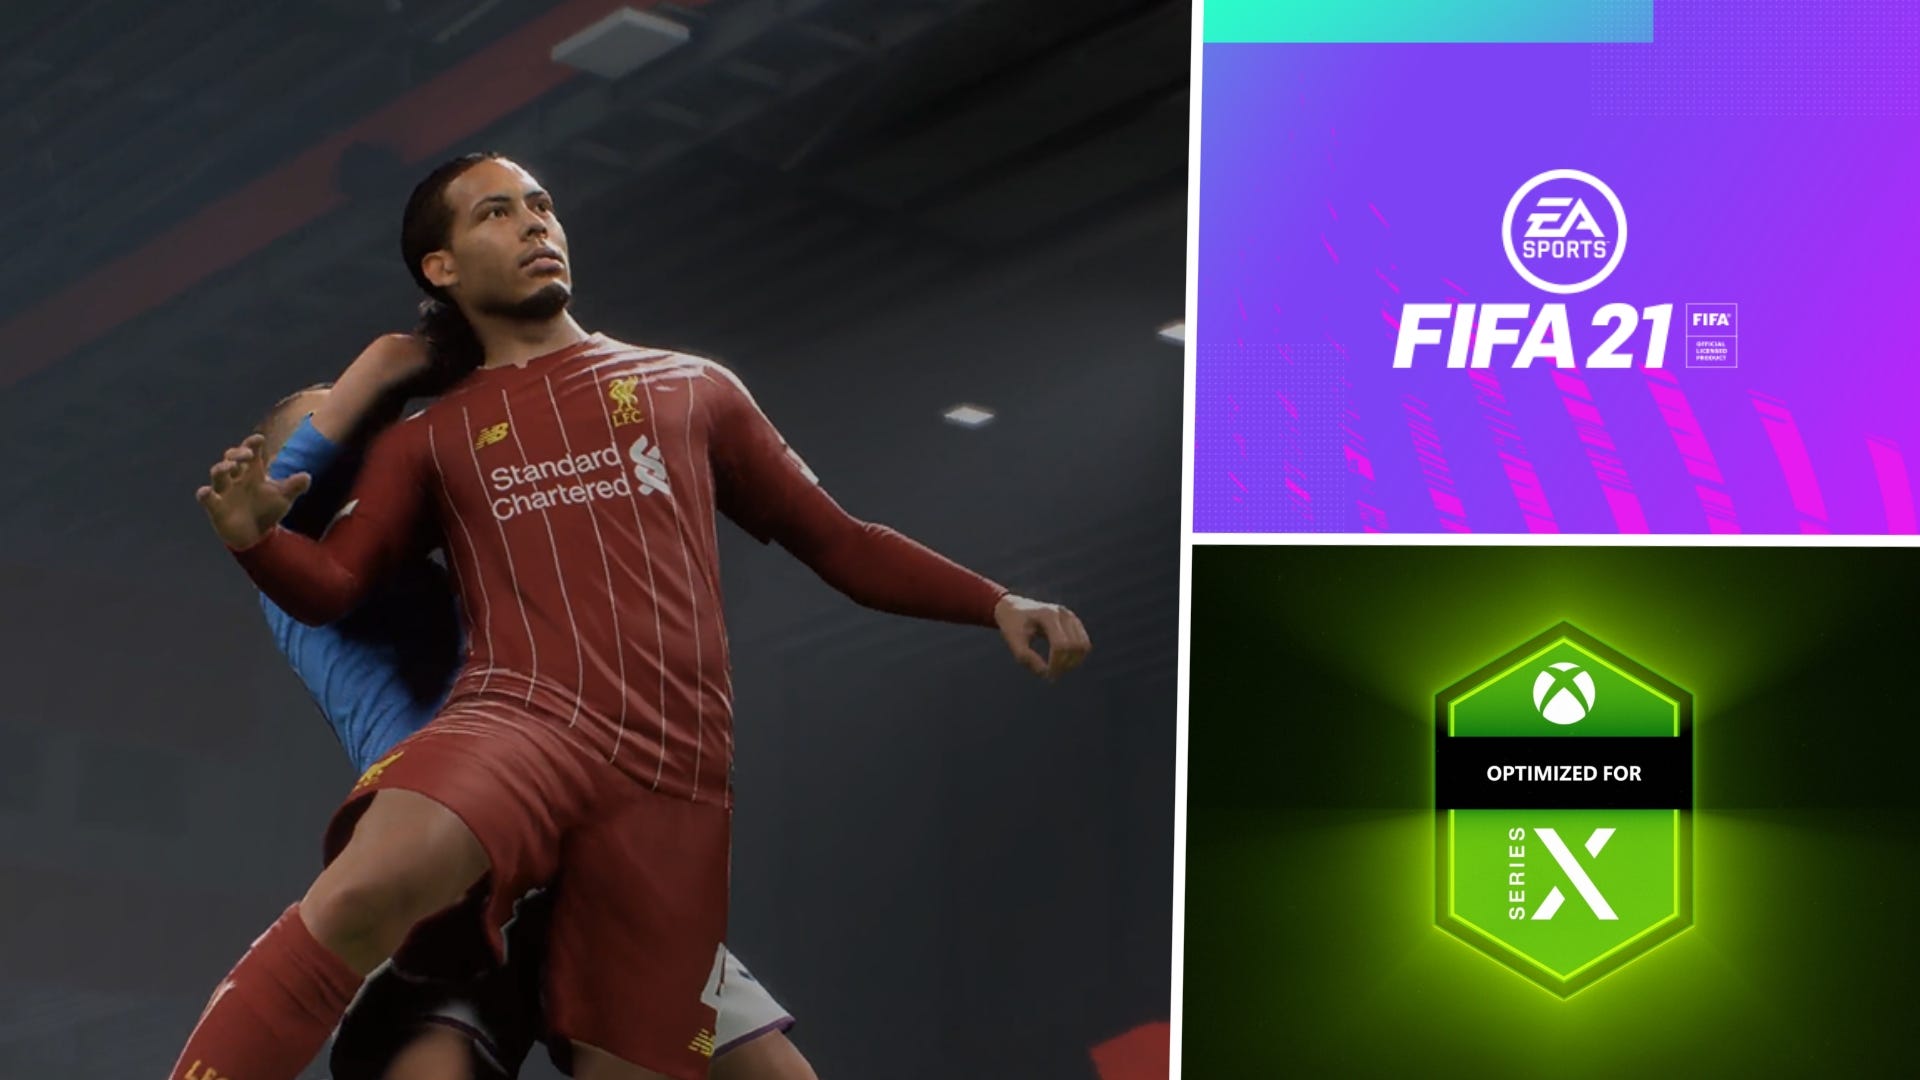 How To Download The FIFA 21 Early Access As Fast As Possible